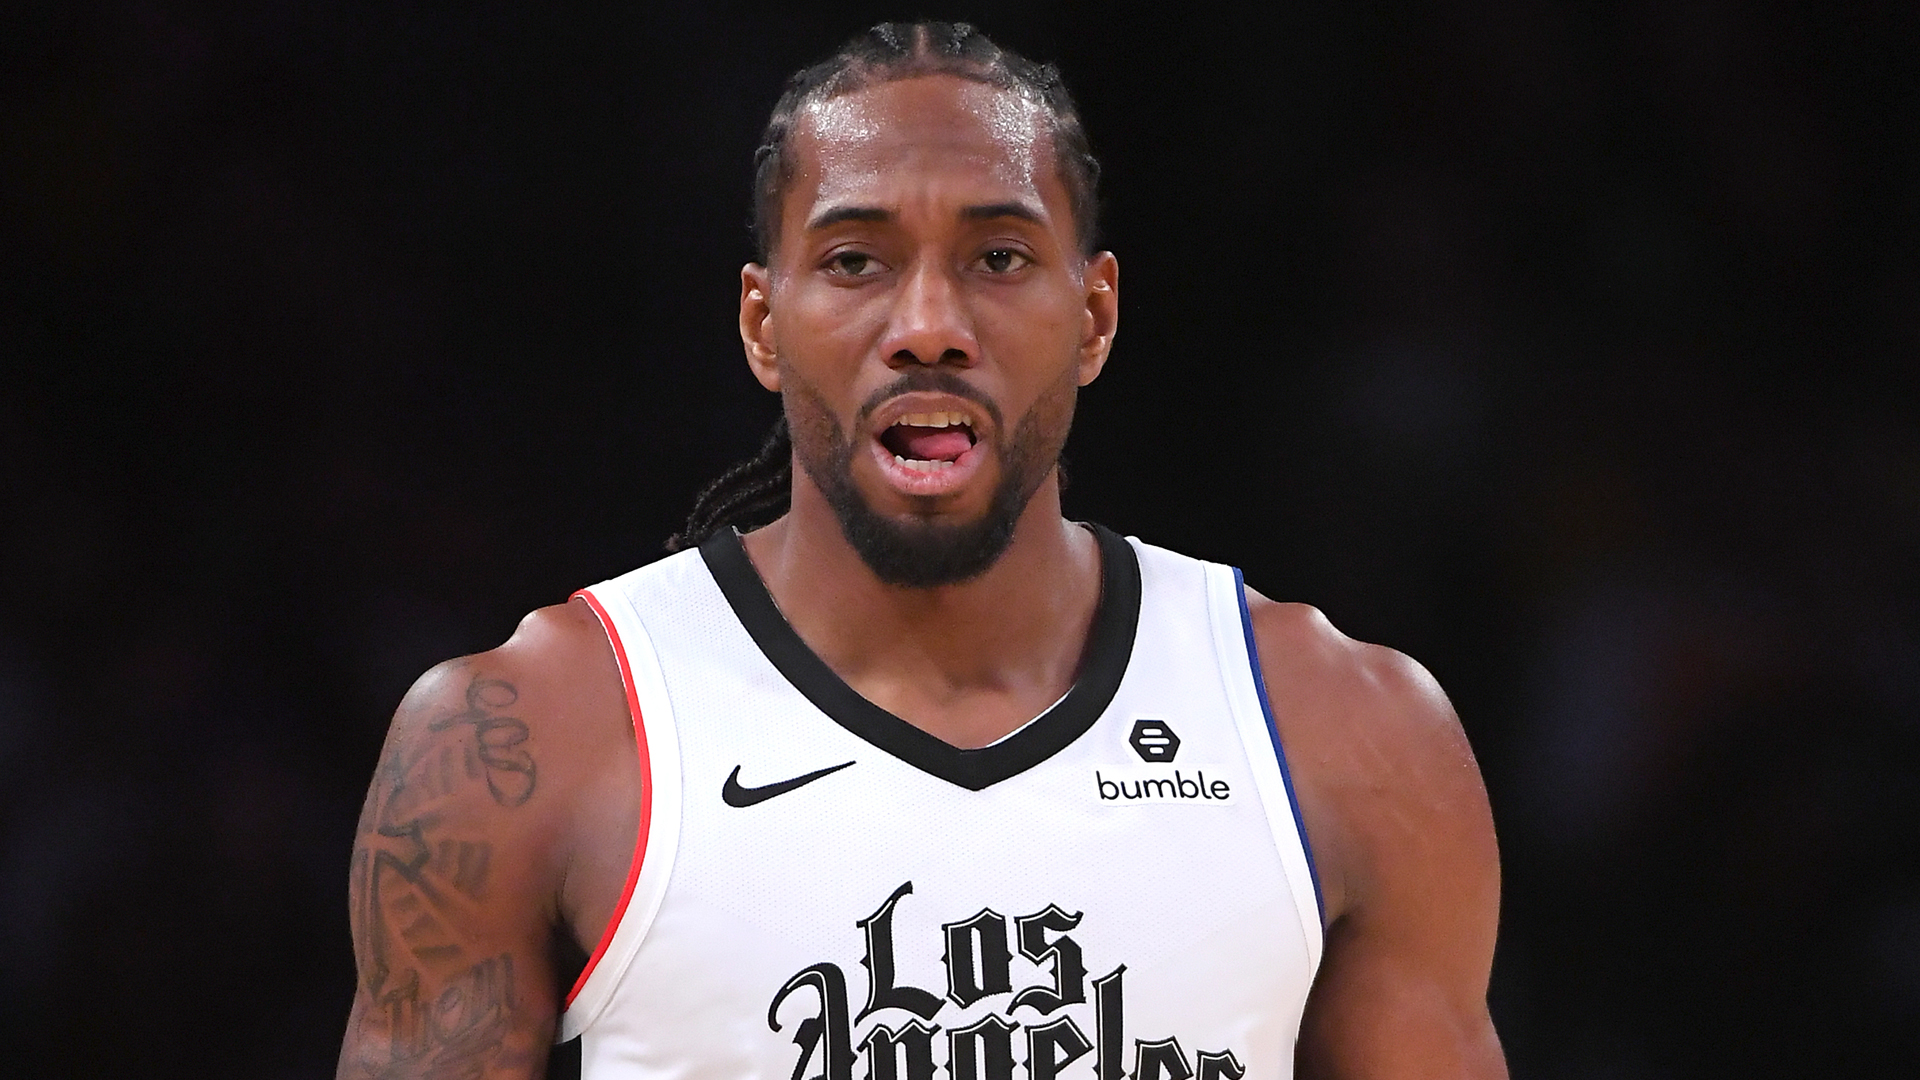 Kawhi Leonard reportedly has an excused absence from the Los Angeles Clippers as he tends to a family matter.